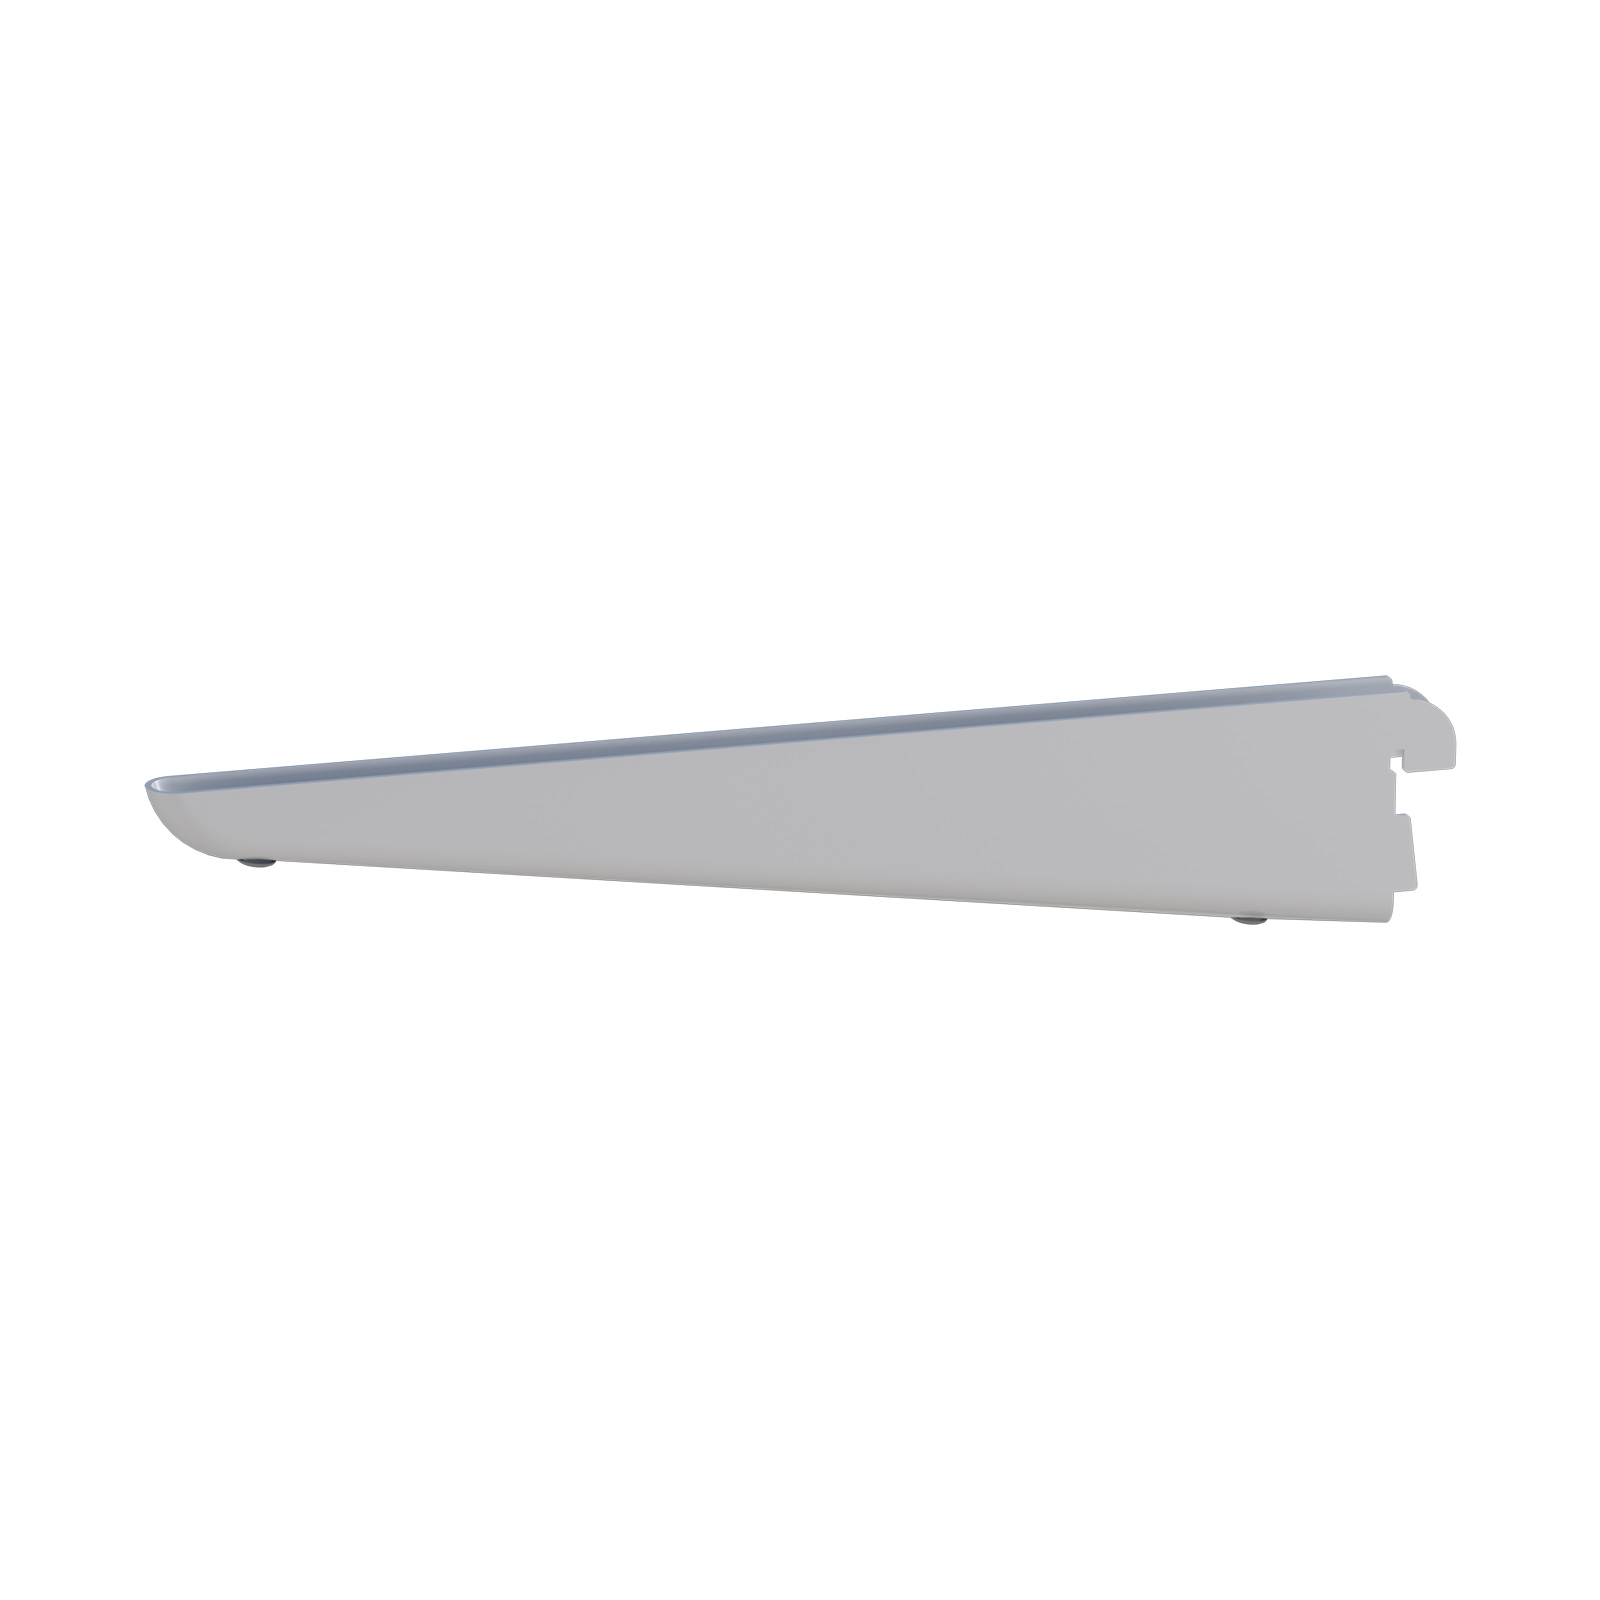 Home Solutions Double Slot Bracket White 270mm